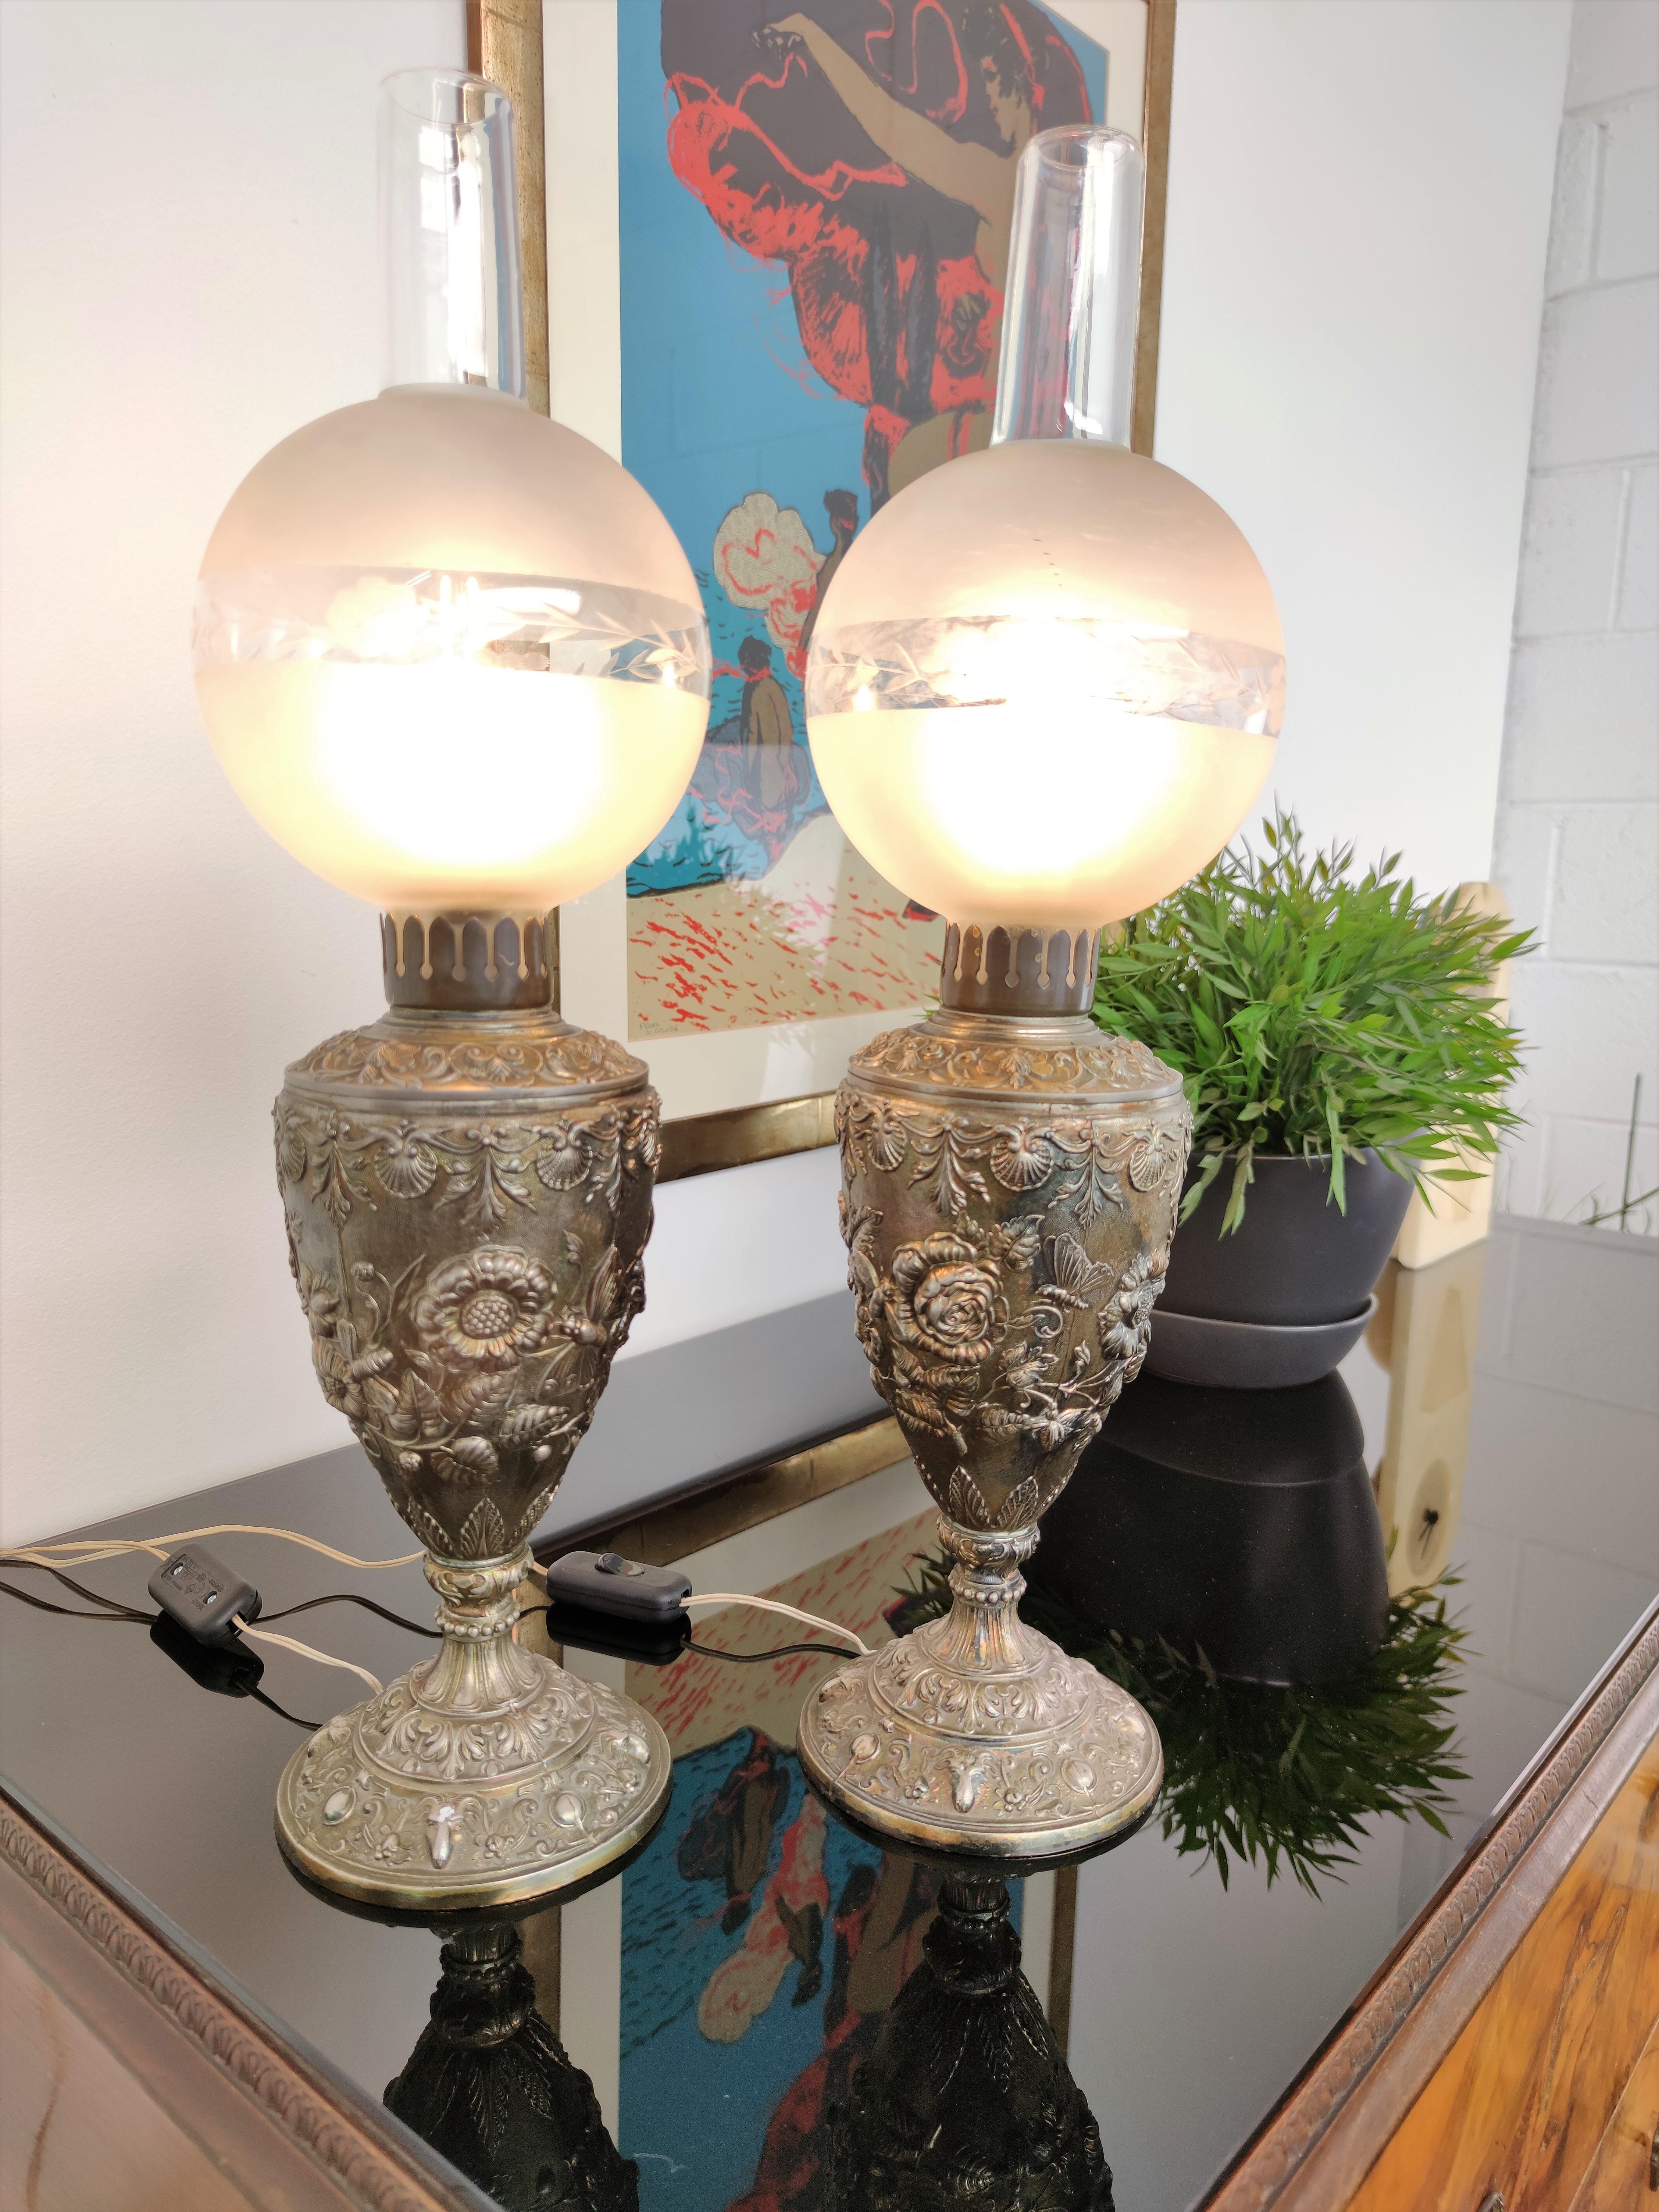 Beautiful pair of Italian table lamps in gilt bronze with the typical urn shape of oil lamps converted to electric with the etched glass globe and top chimney. The design is inspired to nature and botanicals with a flair of Grecian classical